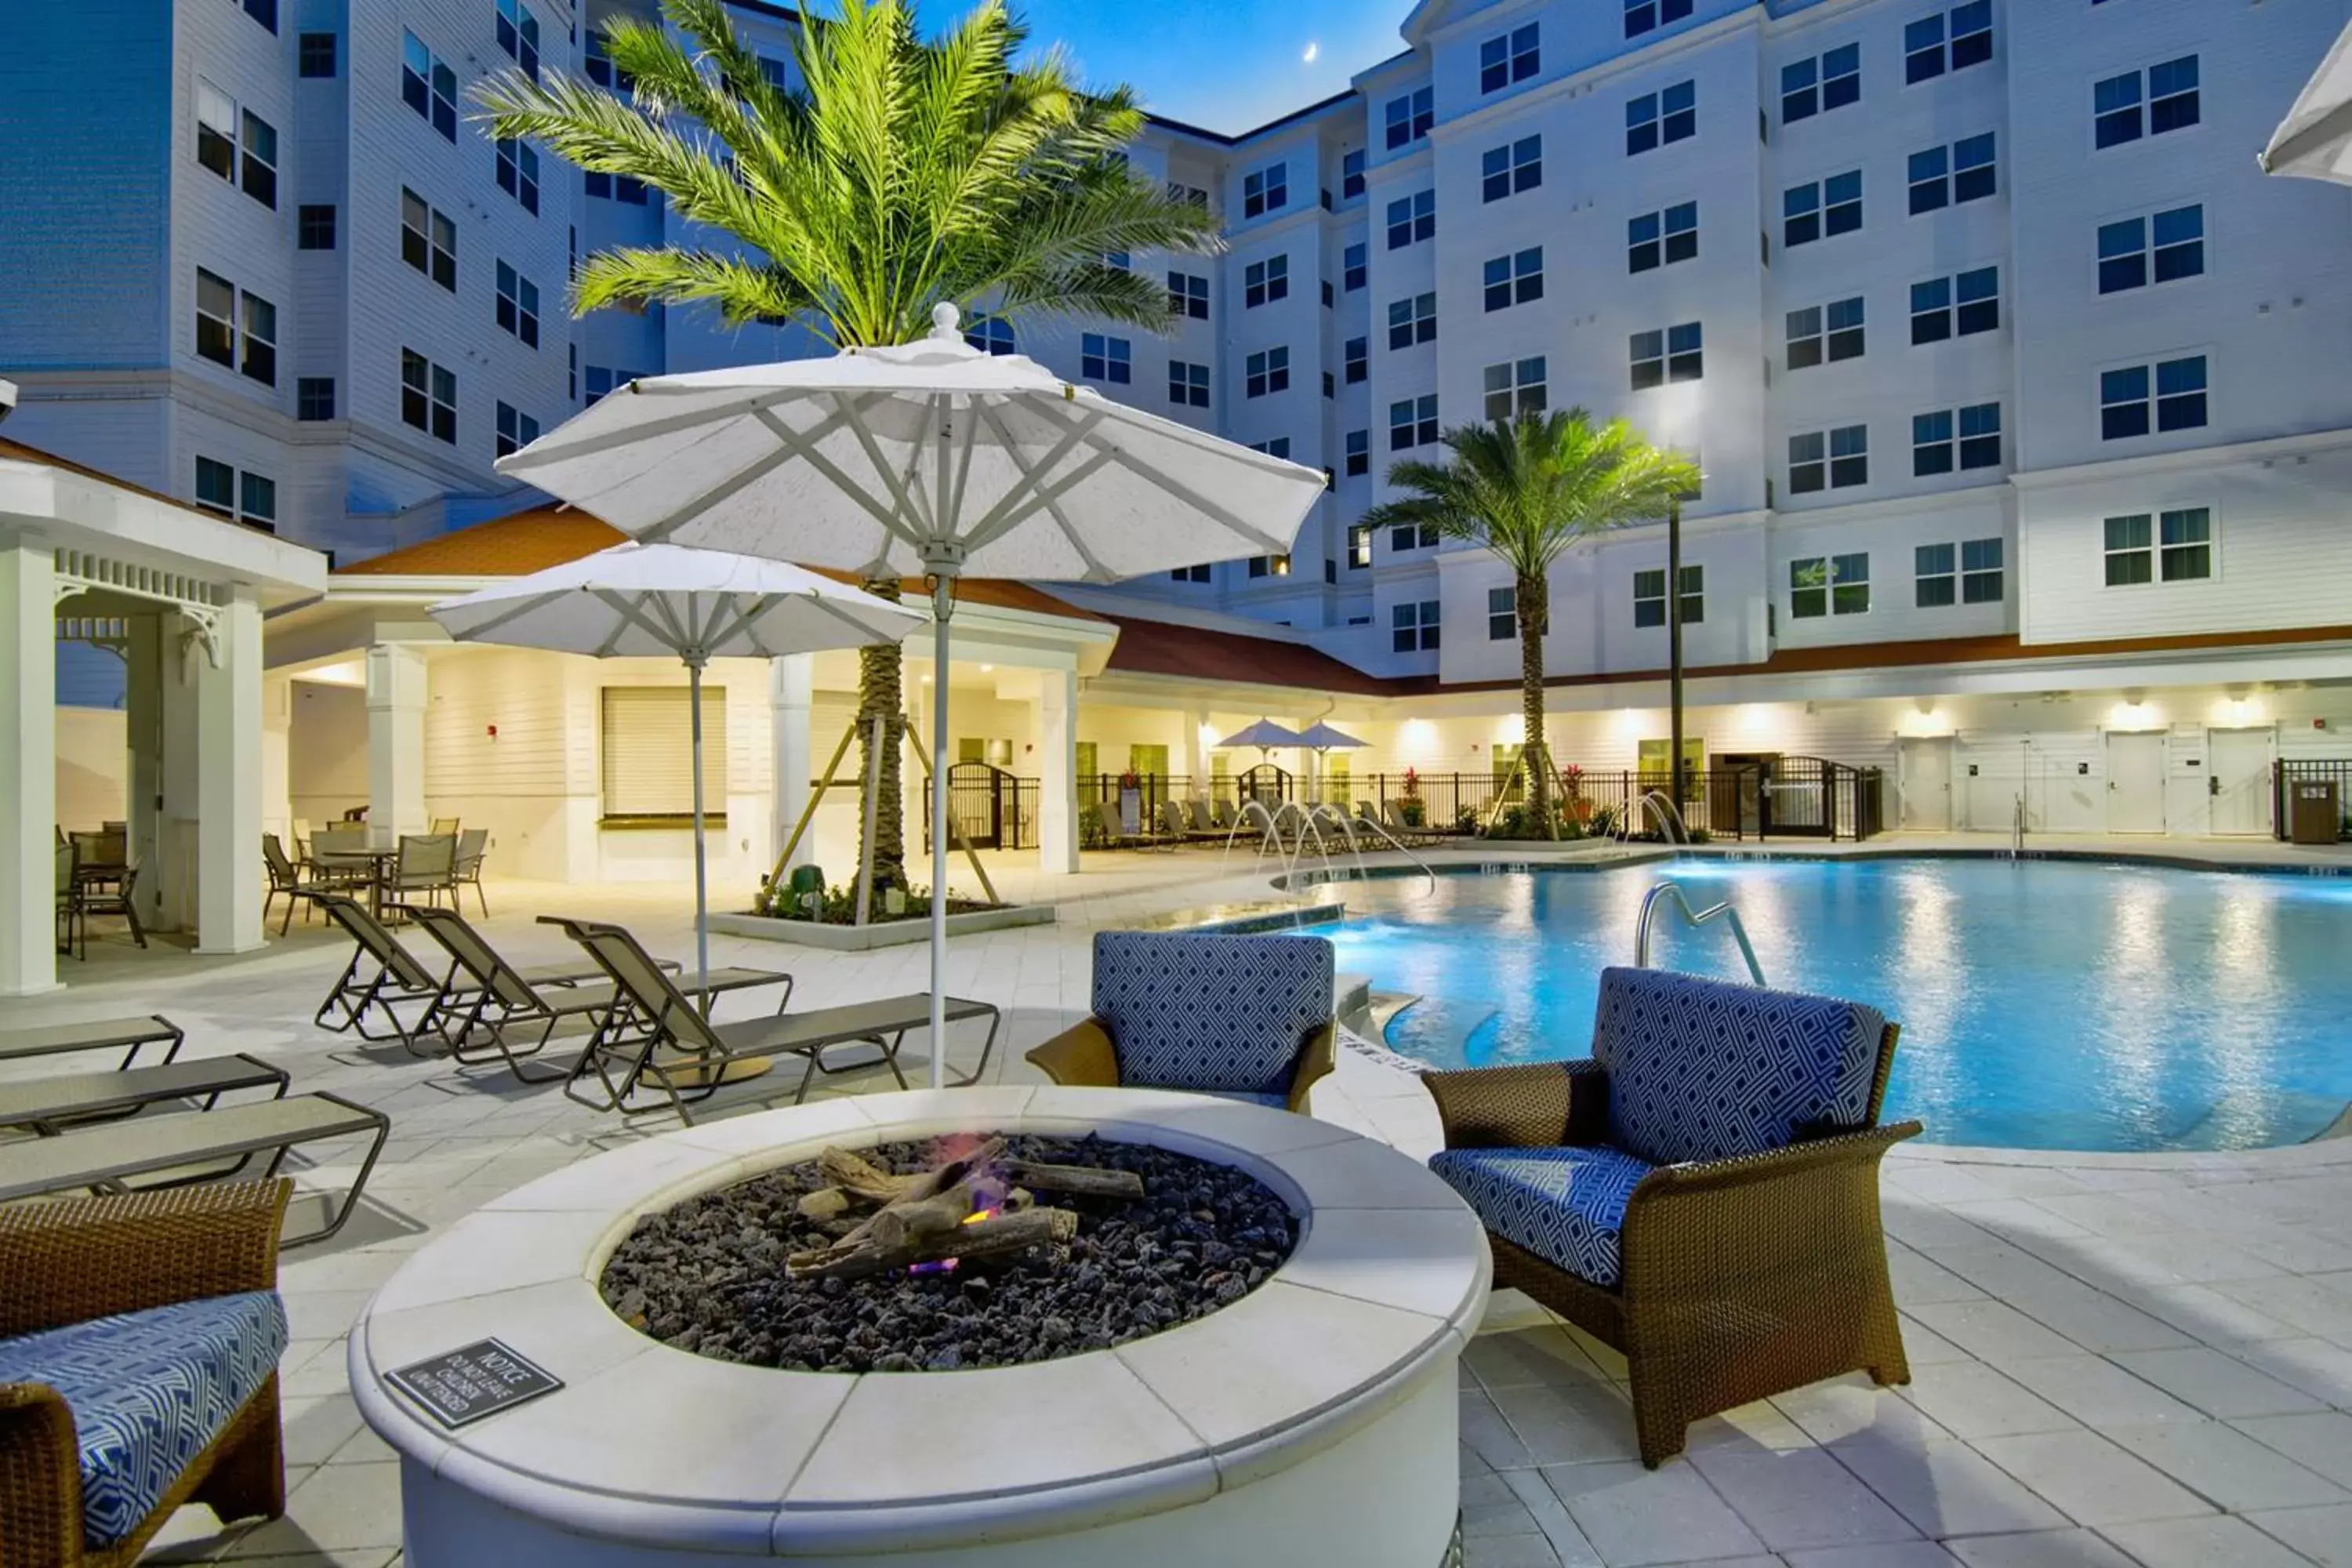 Swimming Pool in Residence Inn by Marriott Orlando at FLAMINGO CROSSINGS Town Center